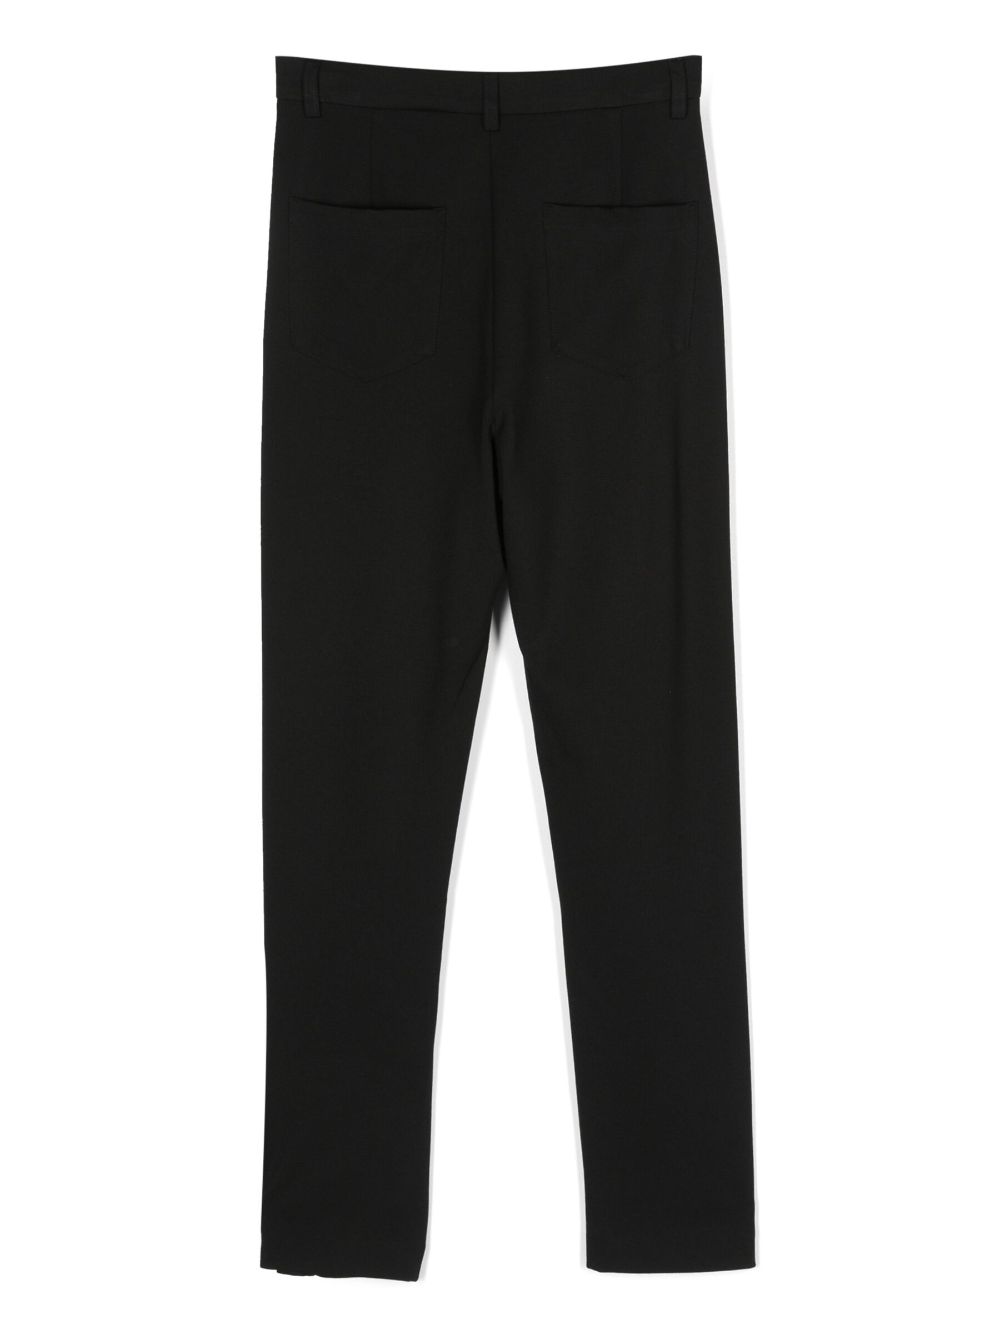 Black trousers for girls with gold buttons